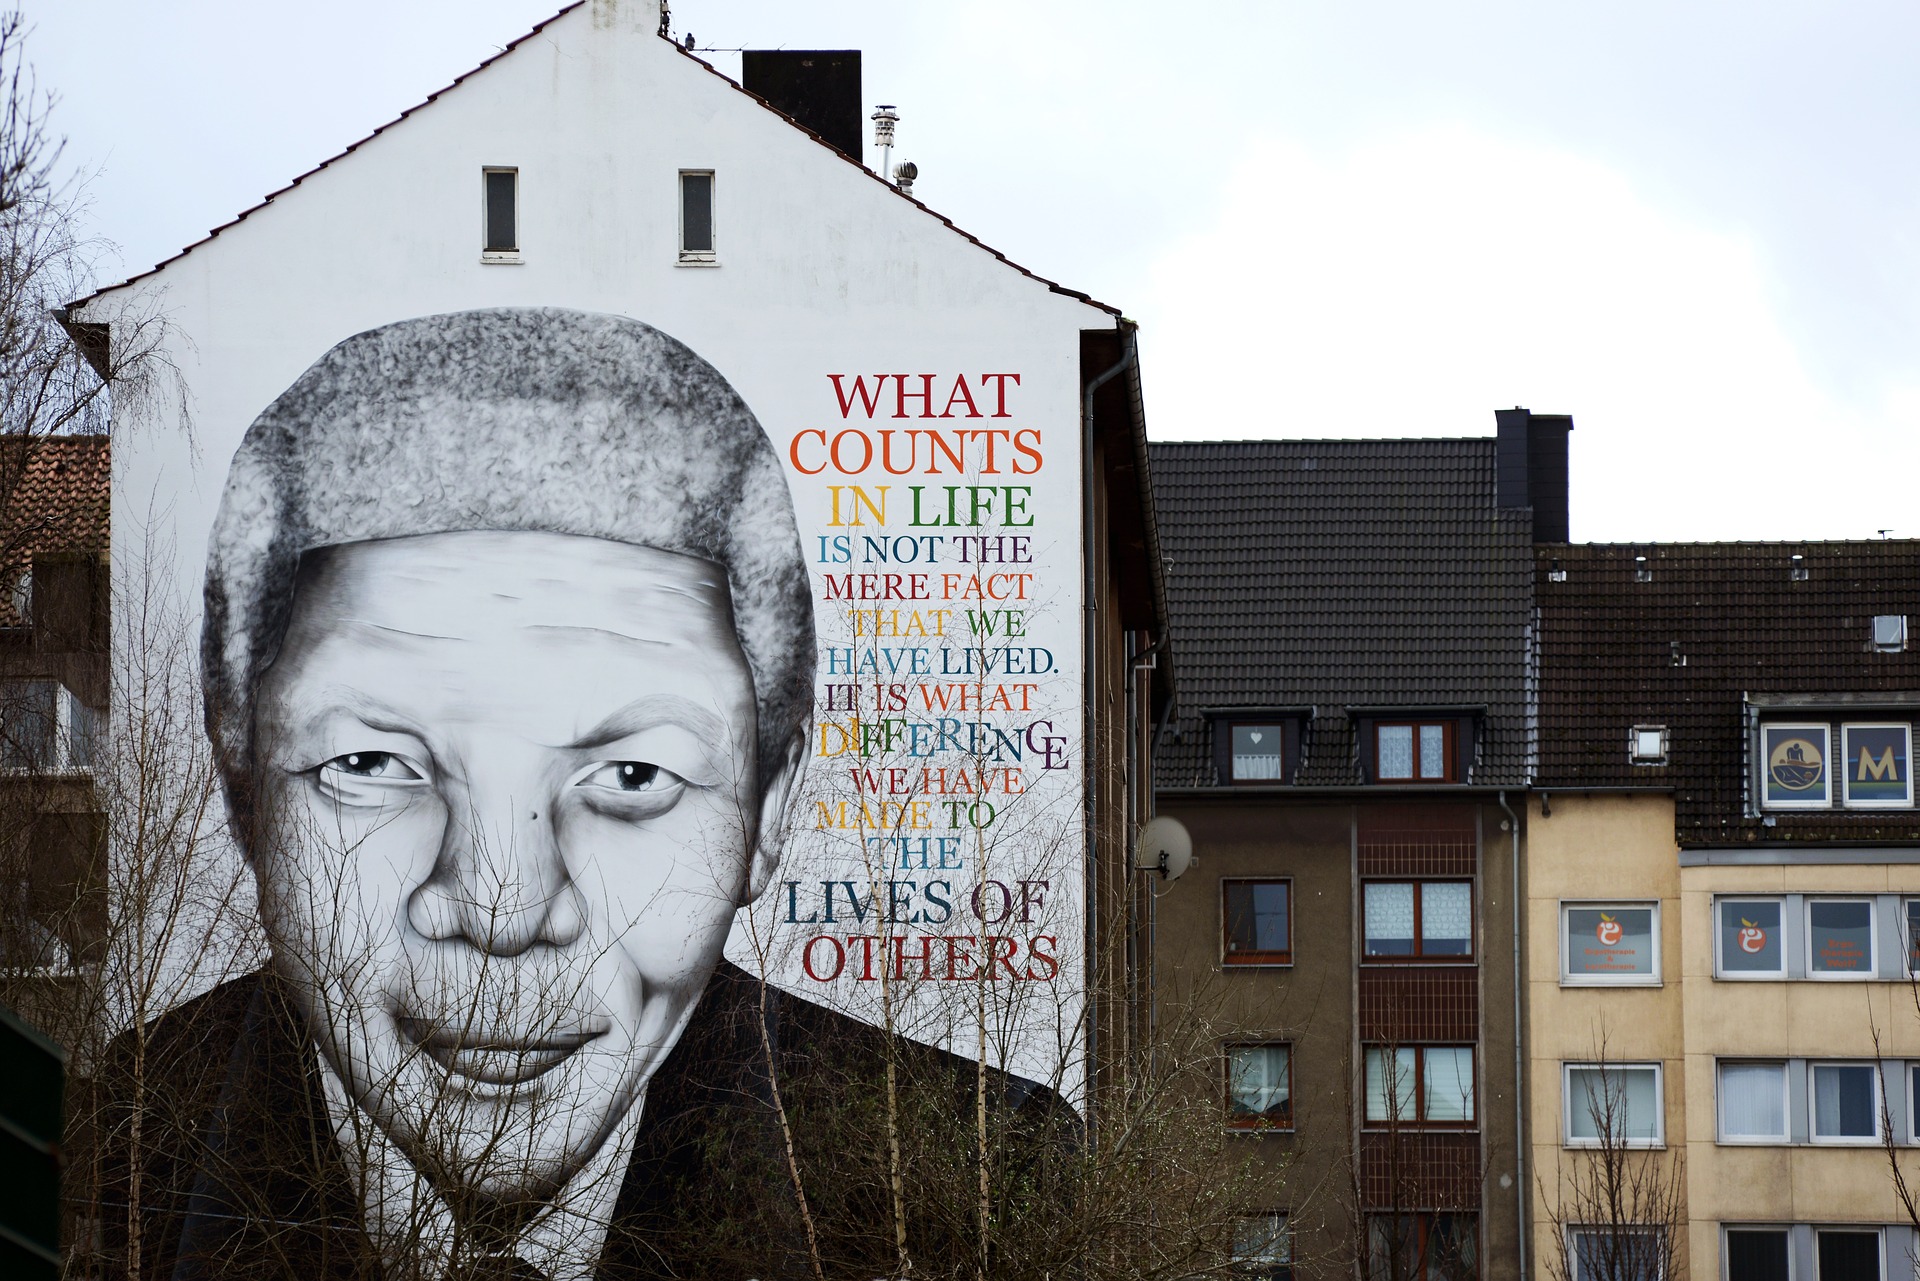 Street art mural of Nelson Mandela and a quotation by him